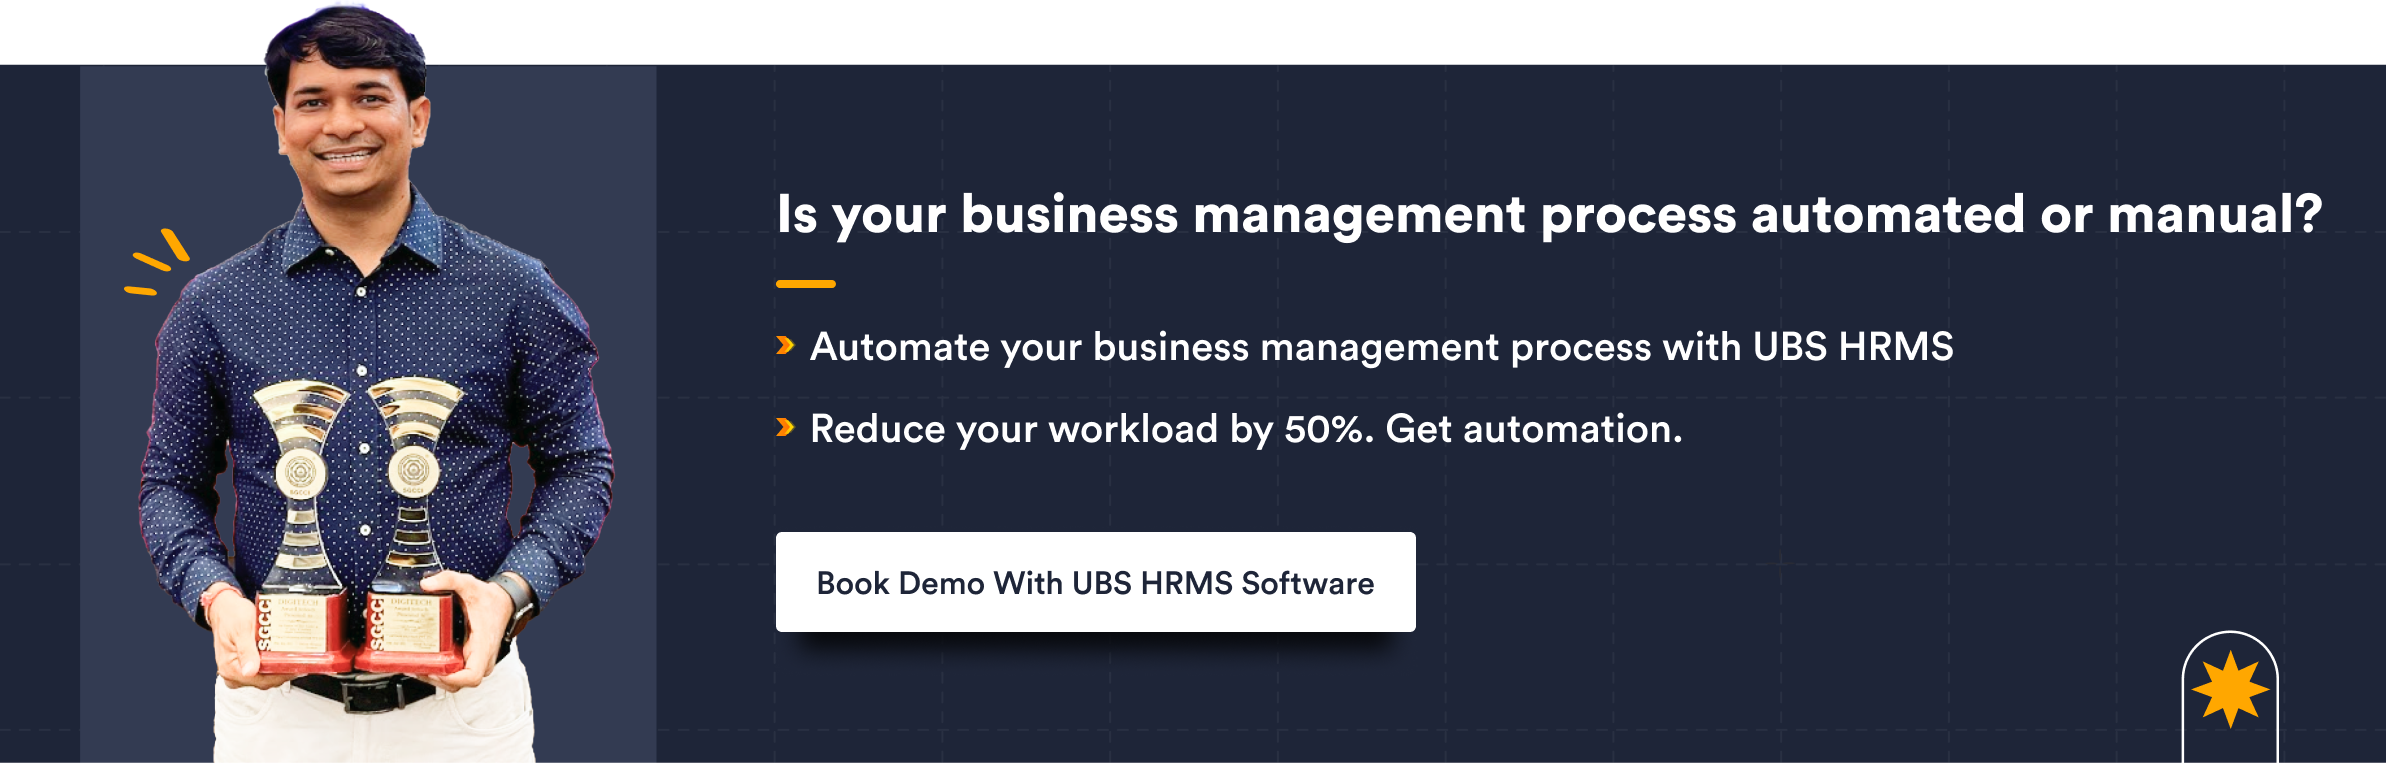 Is your business management process automated or manual